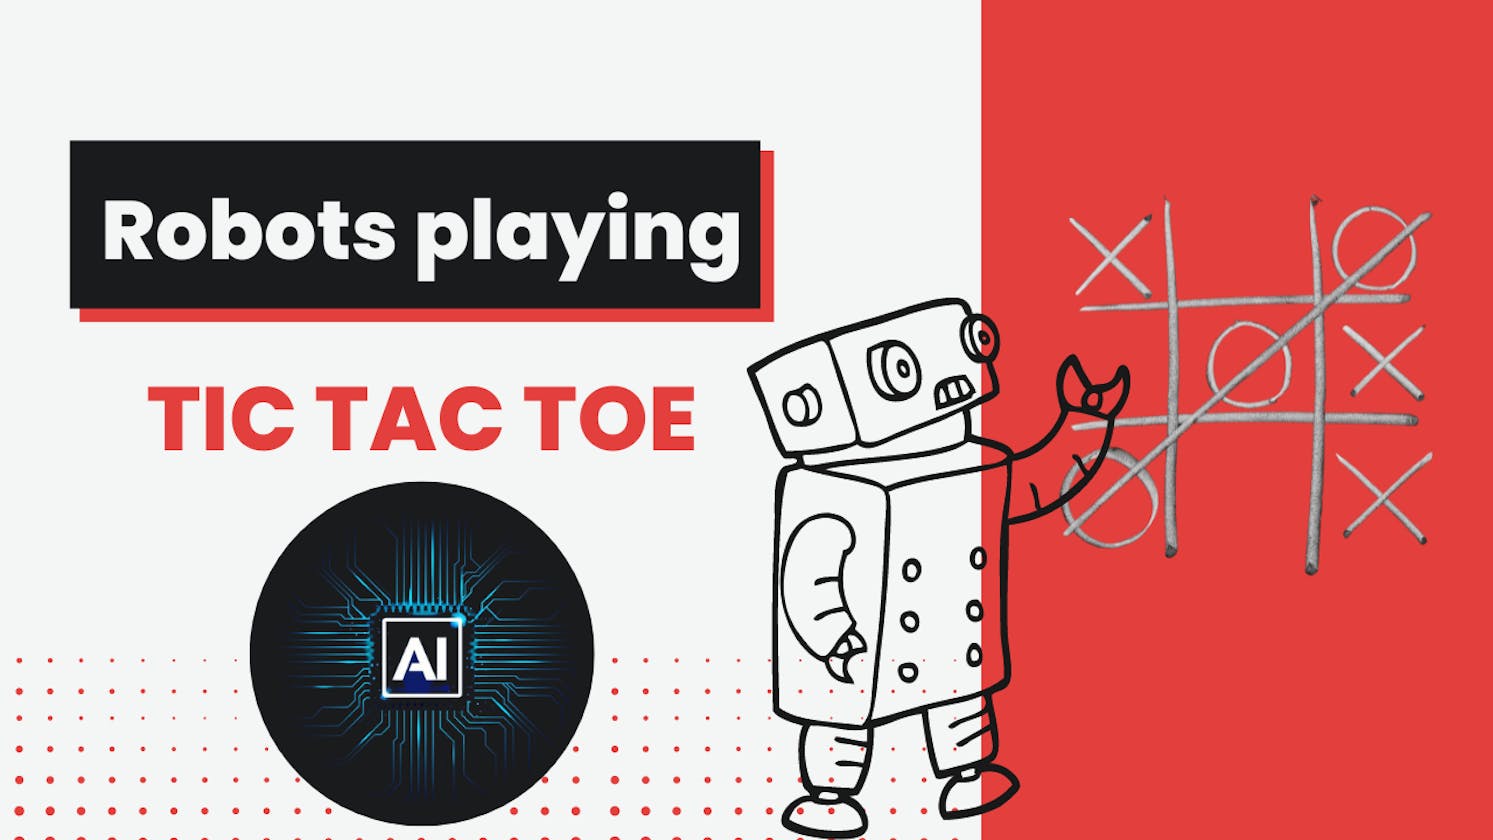 Tic Tac Toe AI - 5 in a row on the App Store